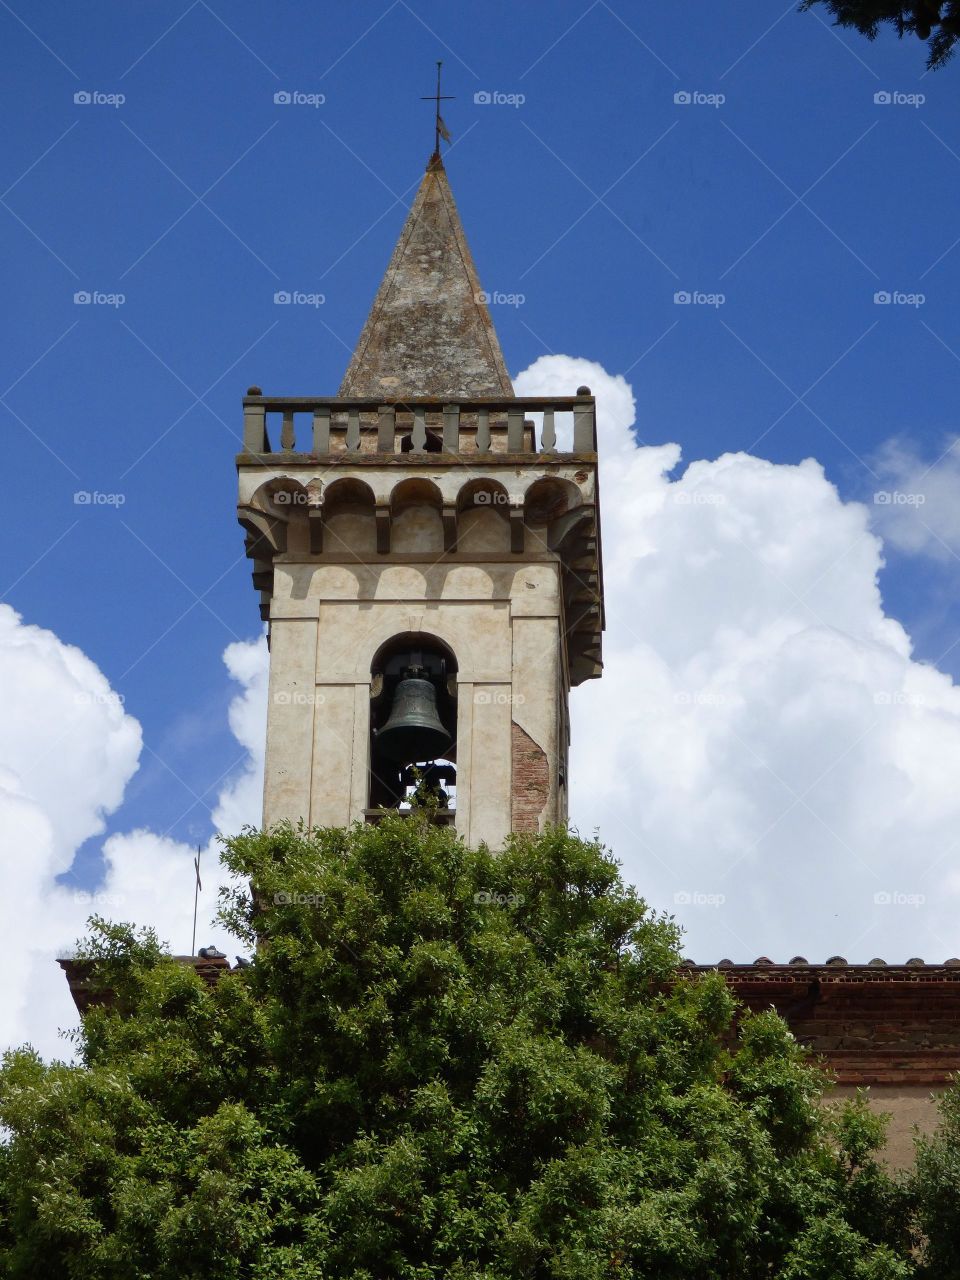 Medieval Bell tower in Volterra Italy with a blue sky and white clouds background.